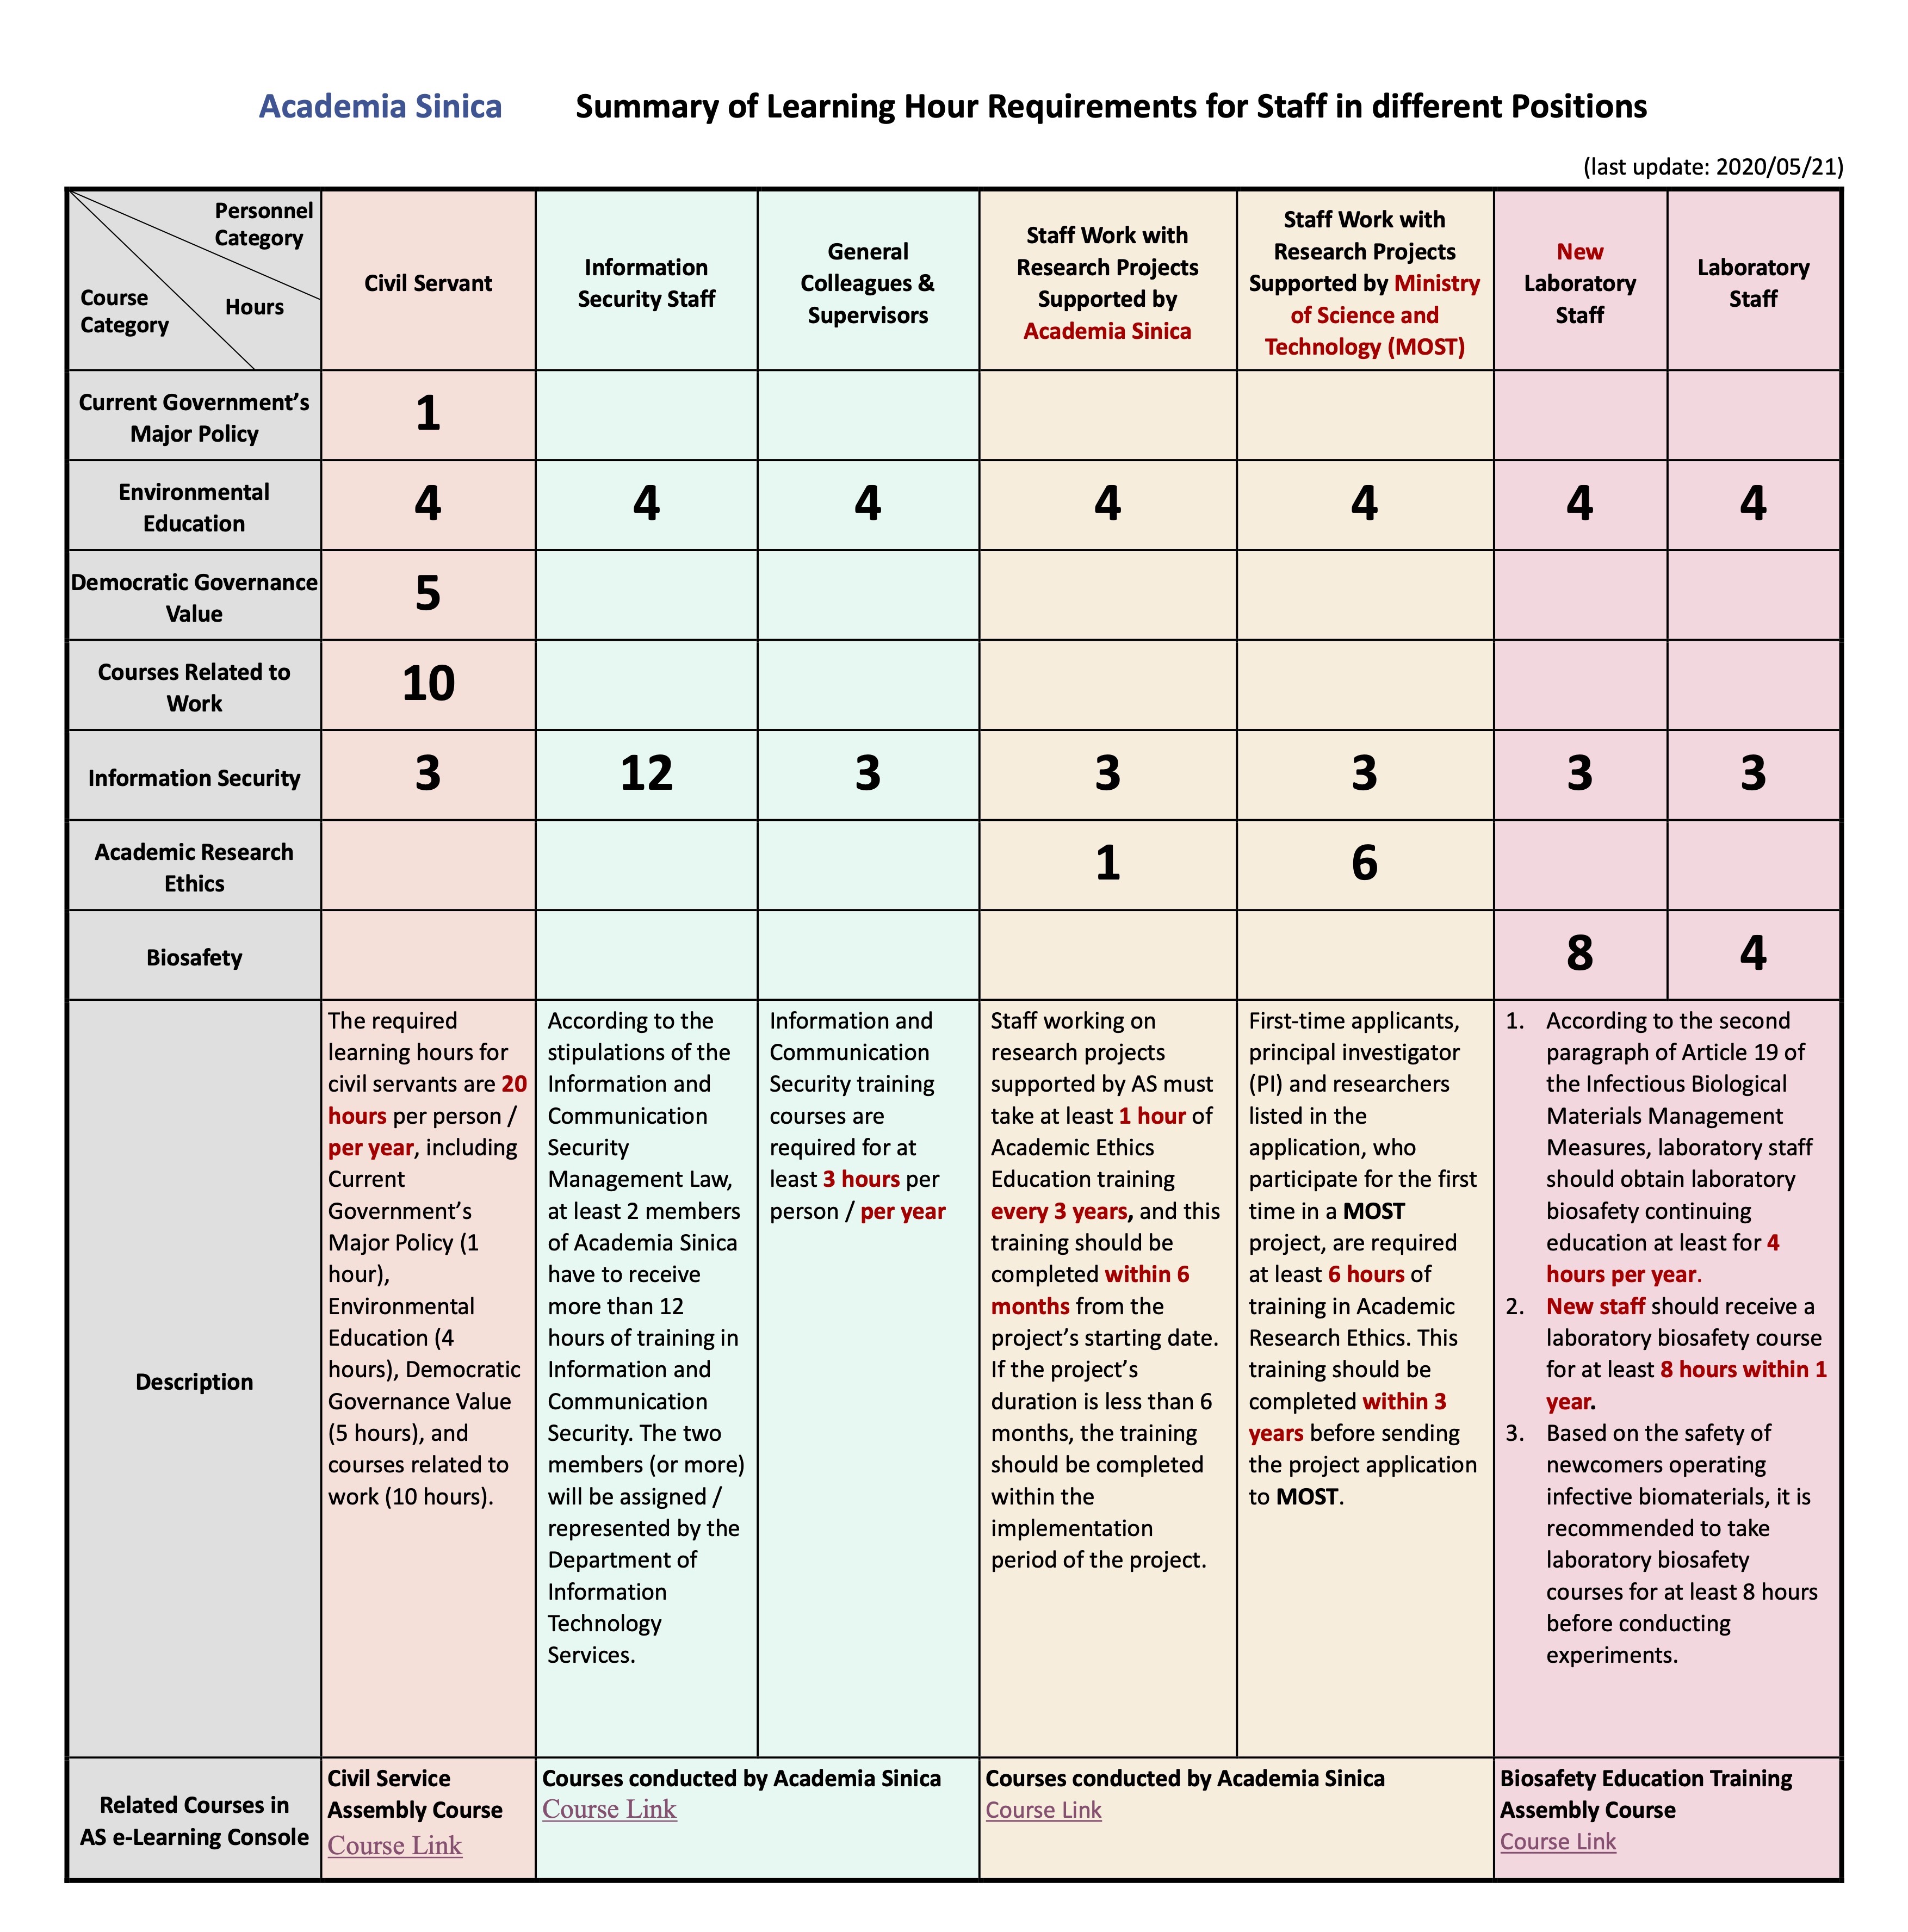 Academia Sinica Summary of Learning Hour Requirements for Staff in different Positions(20200521)